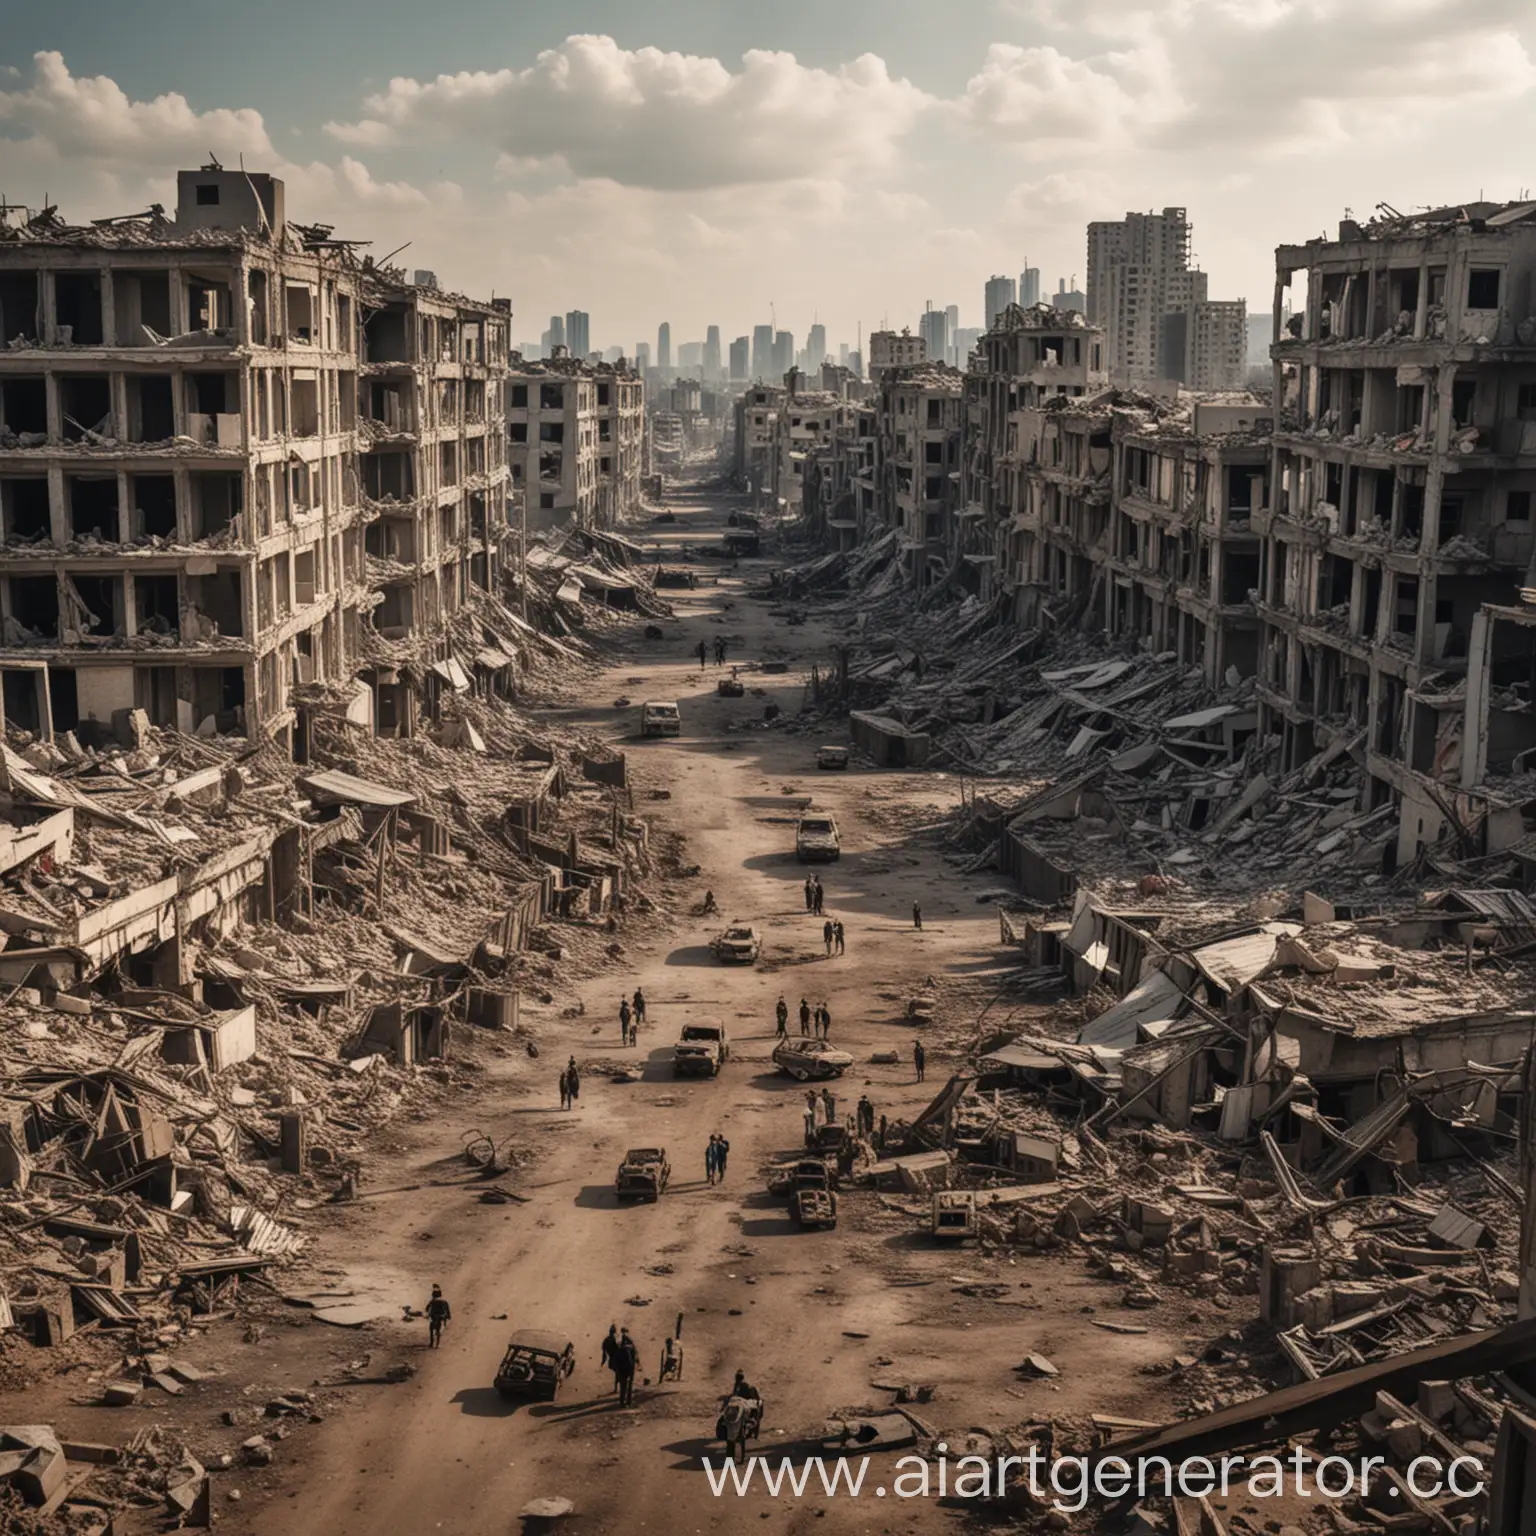 Destroyed-Cityscape-WarTorn-HighRises